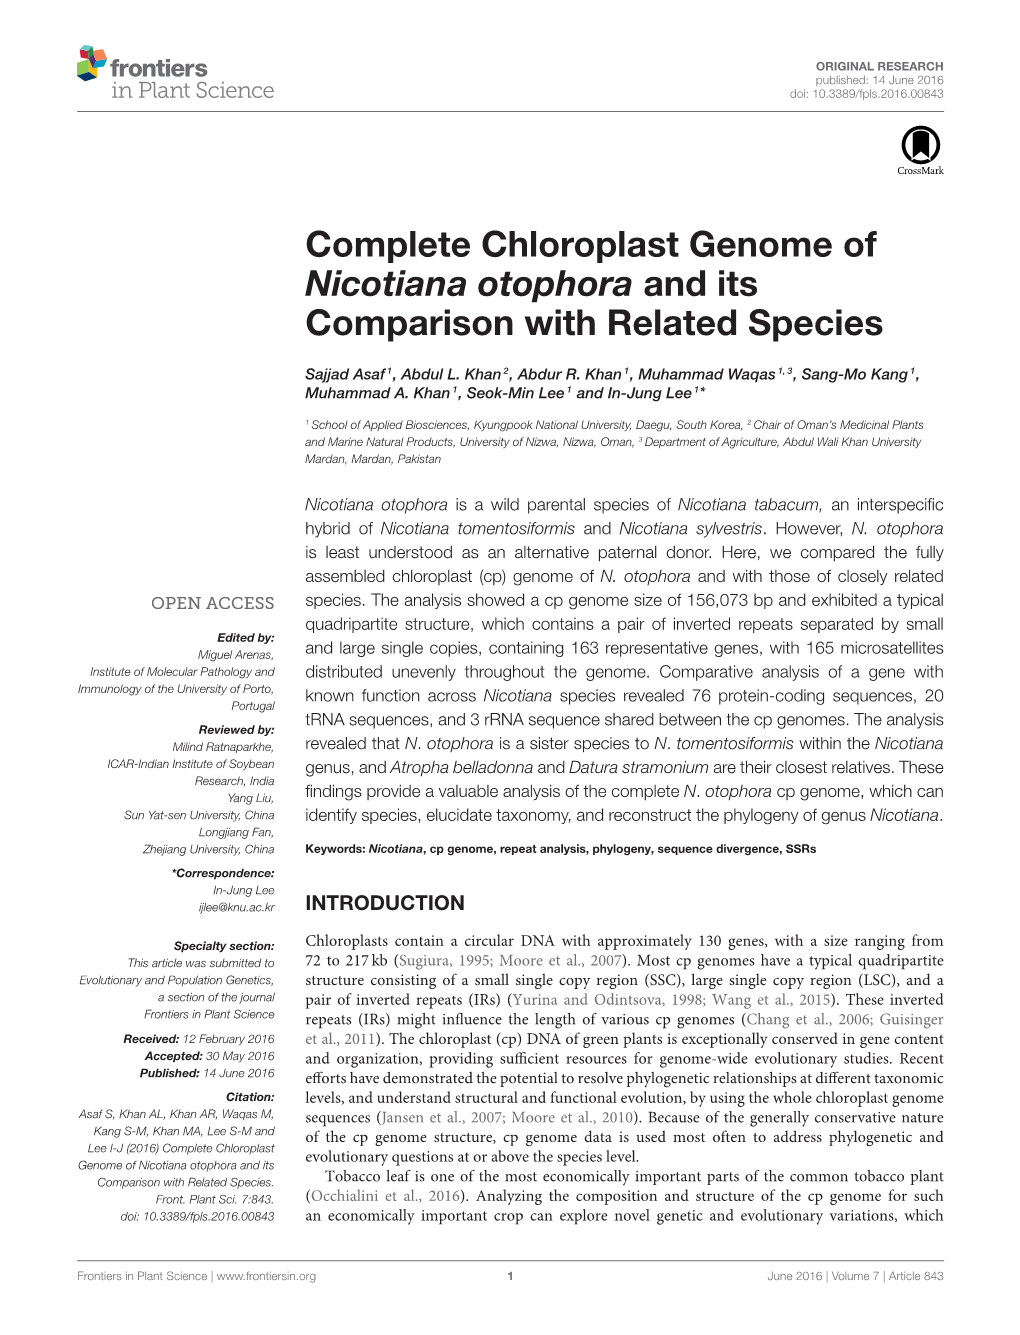 Complete Chloroplast Genome of Nicotiana Otophora and Its Comparison with Related Species